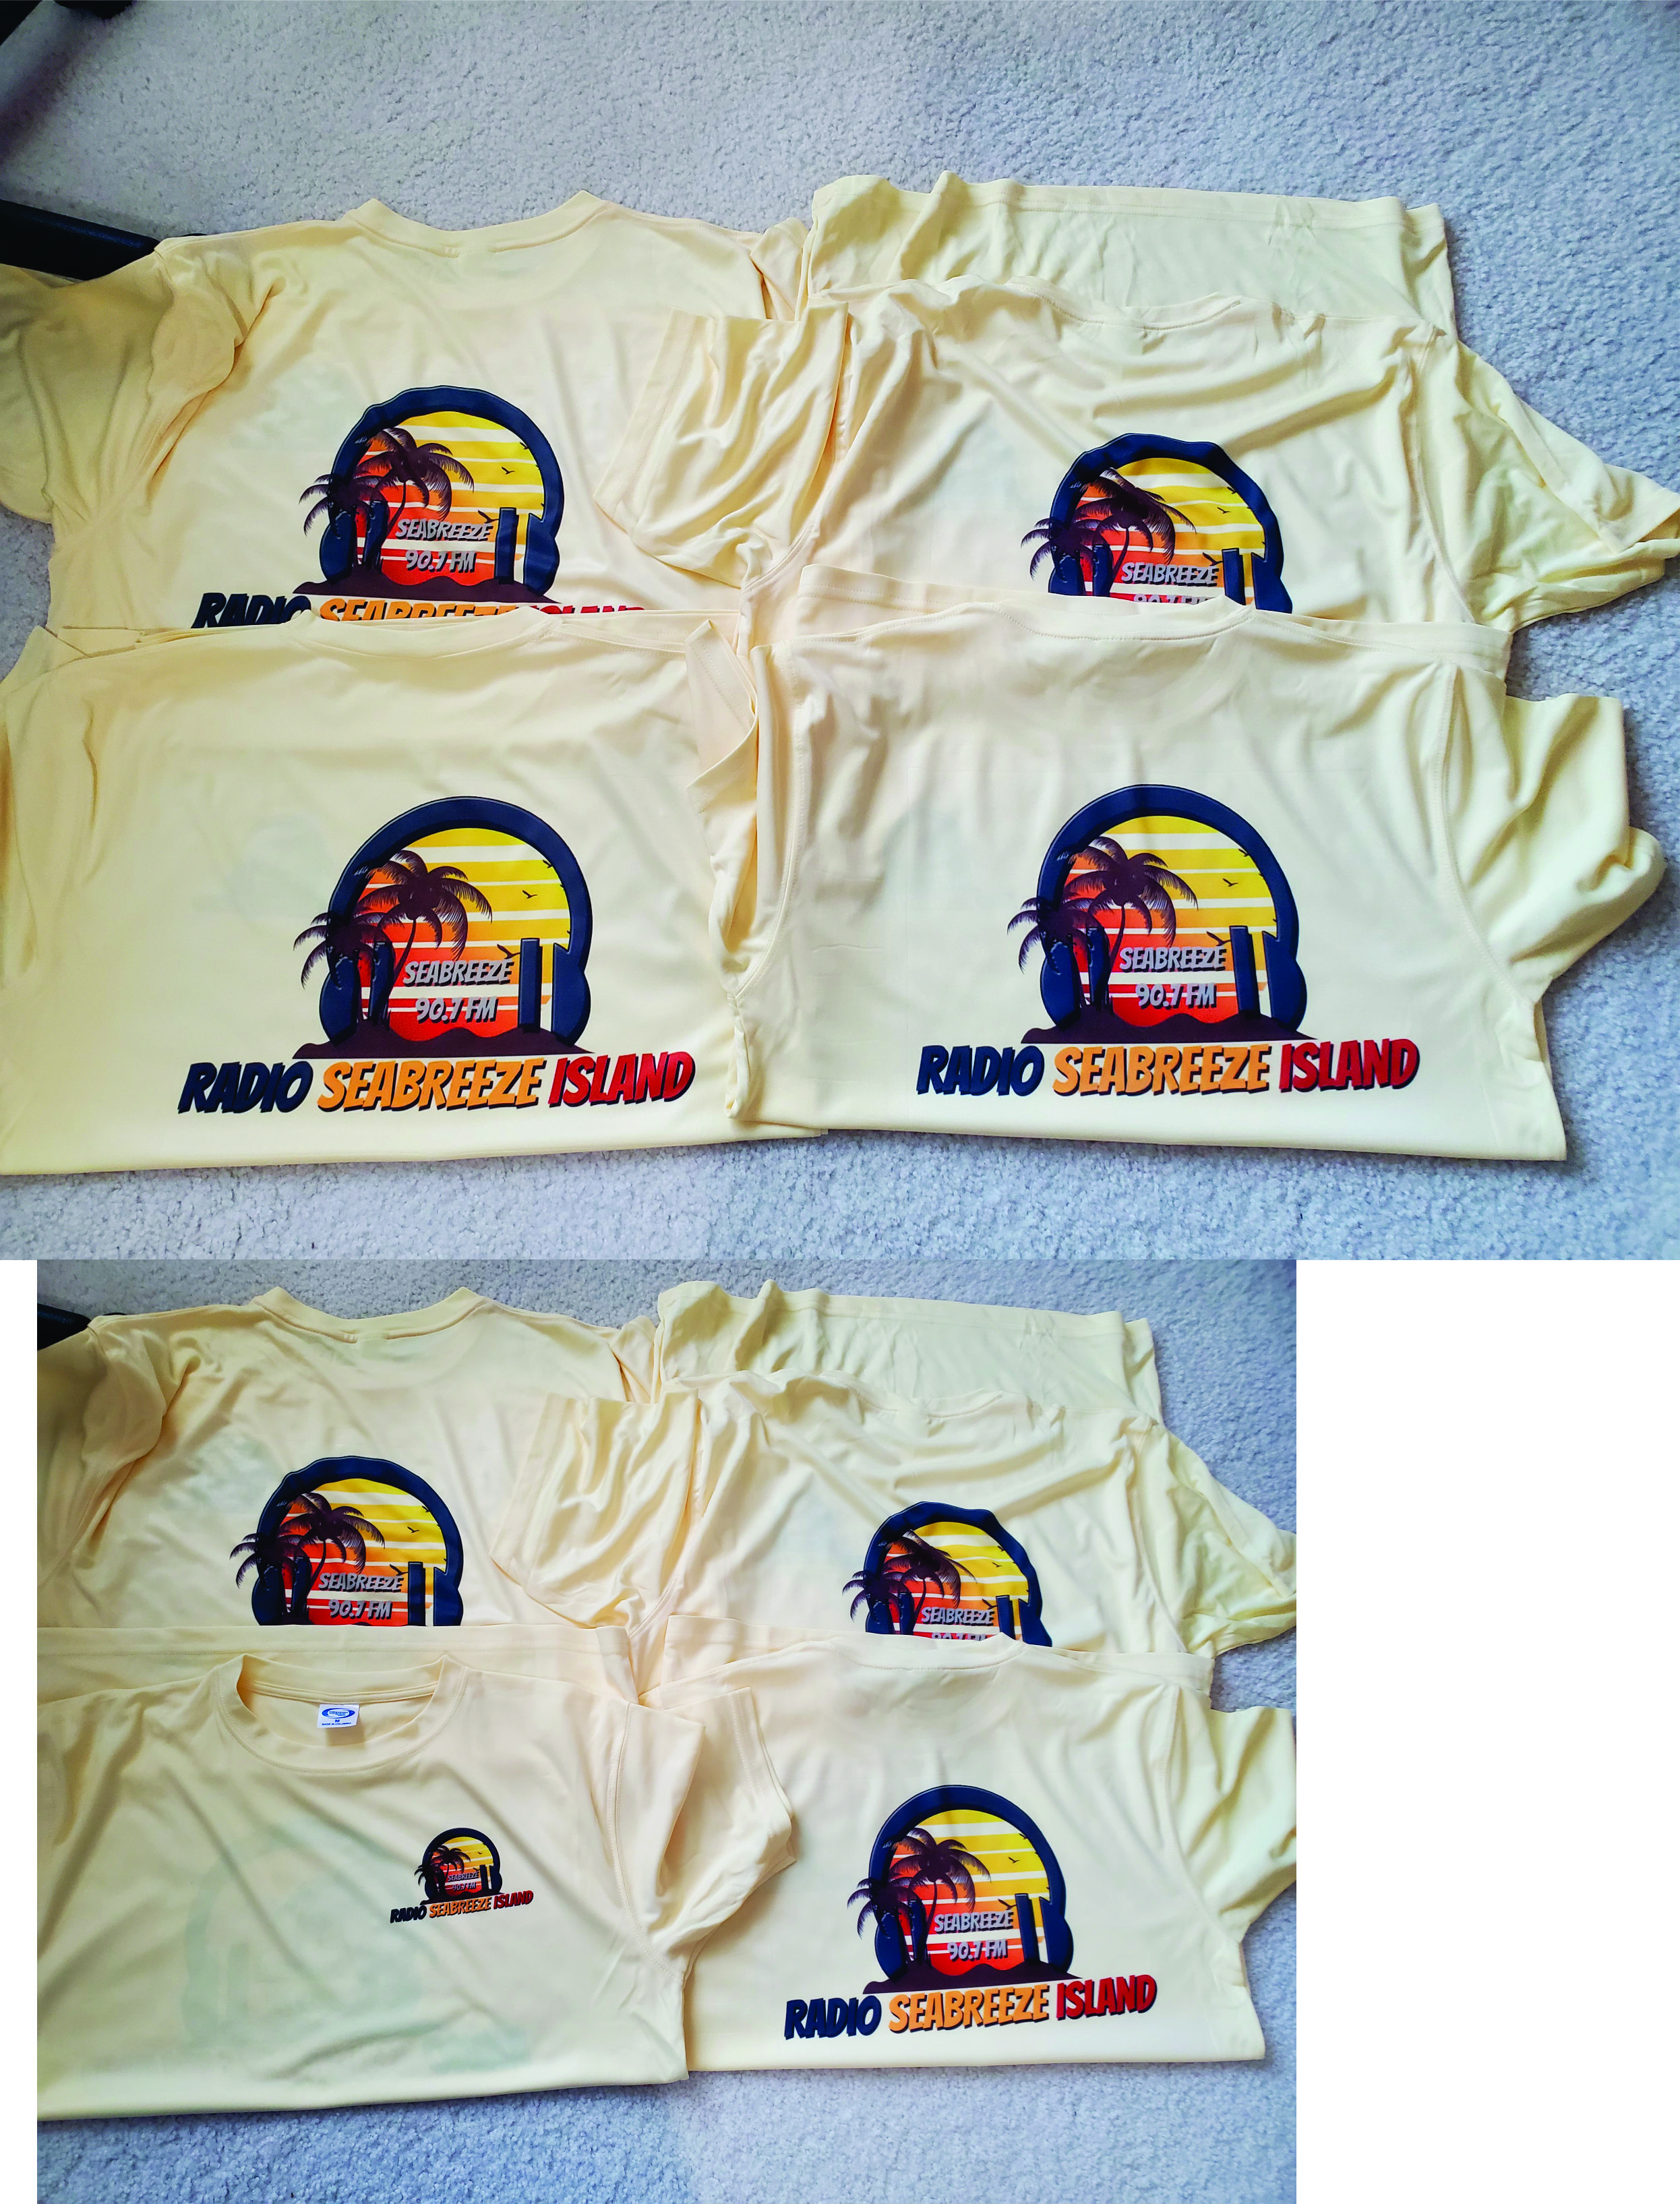 Pele Yellow T-shirt made with sublimation printing